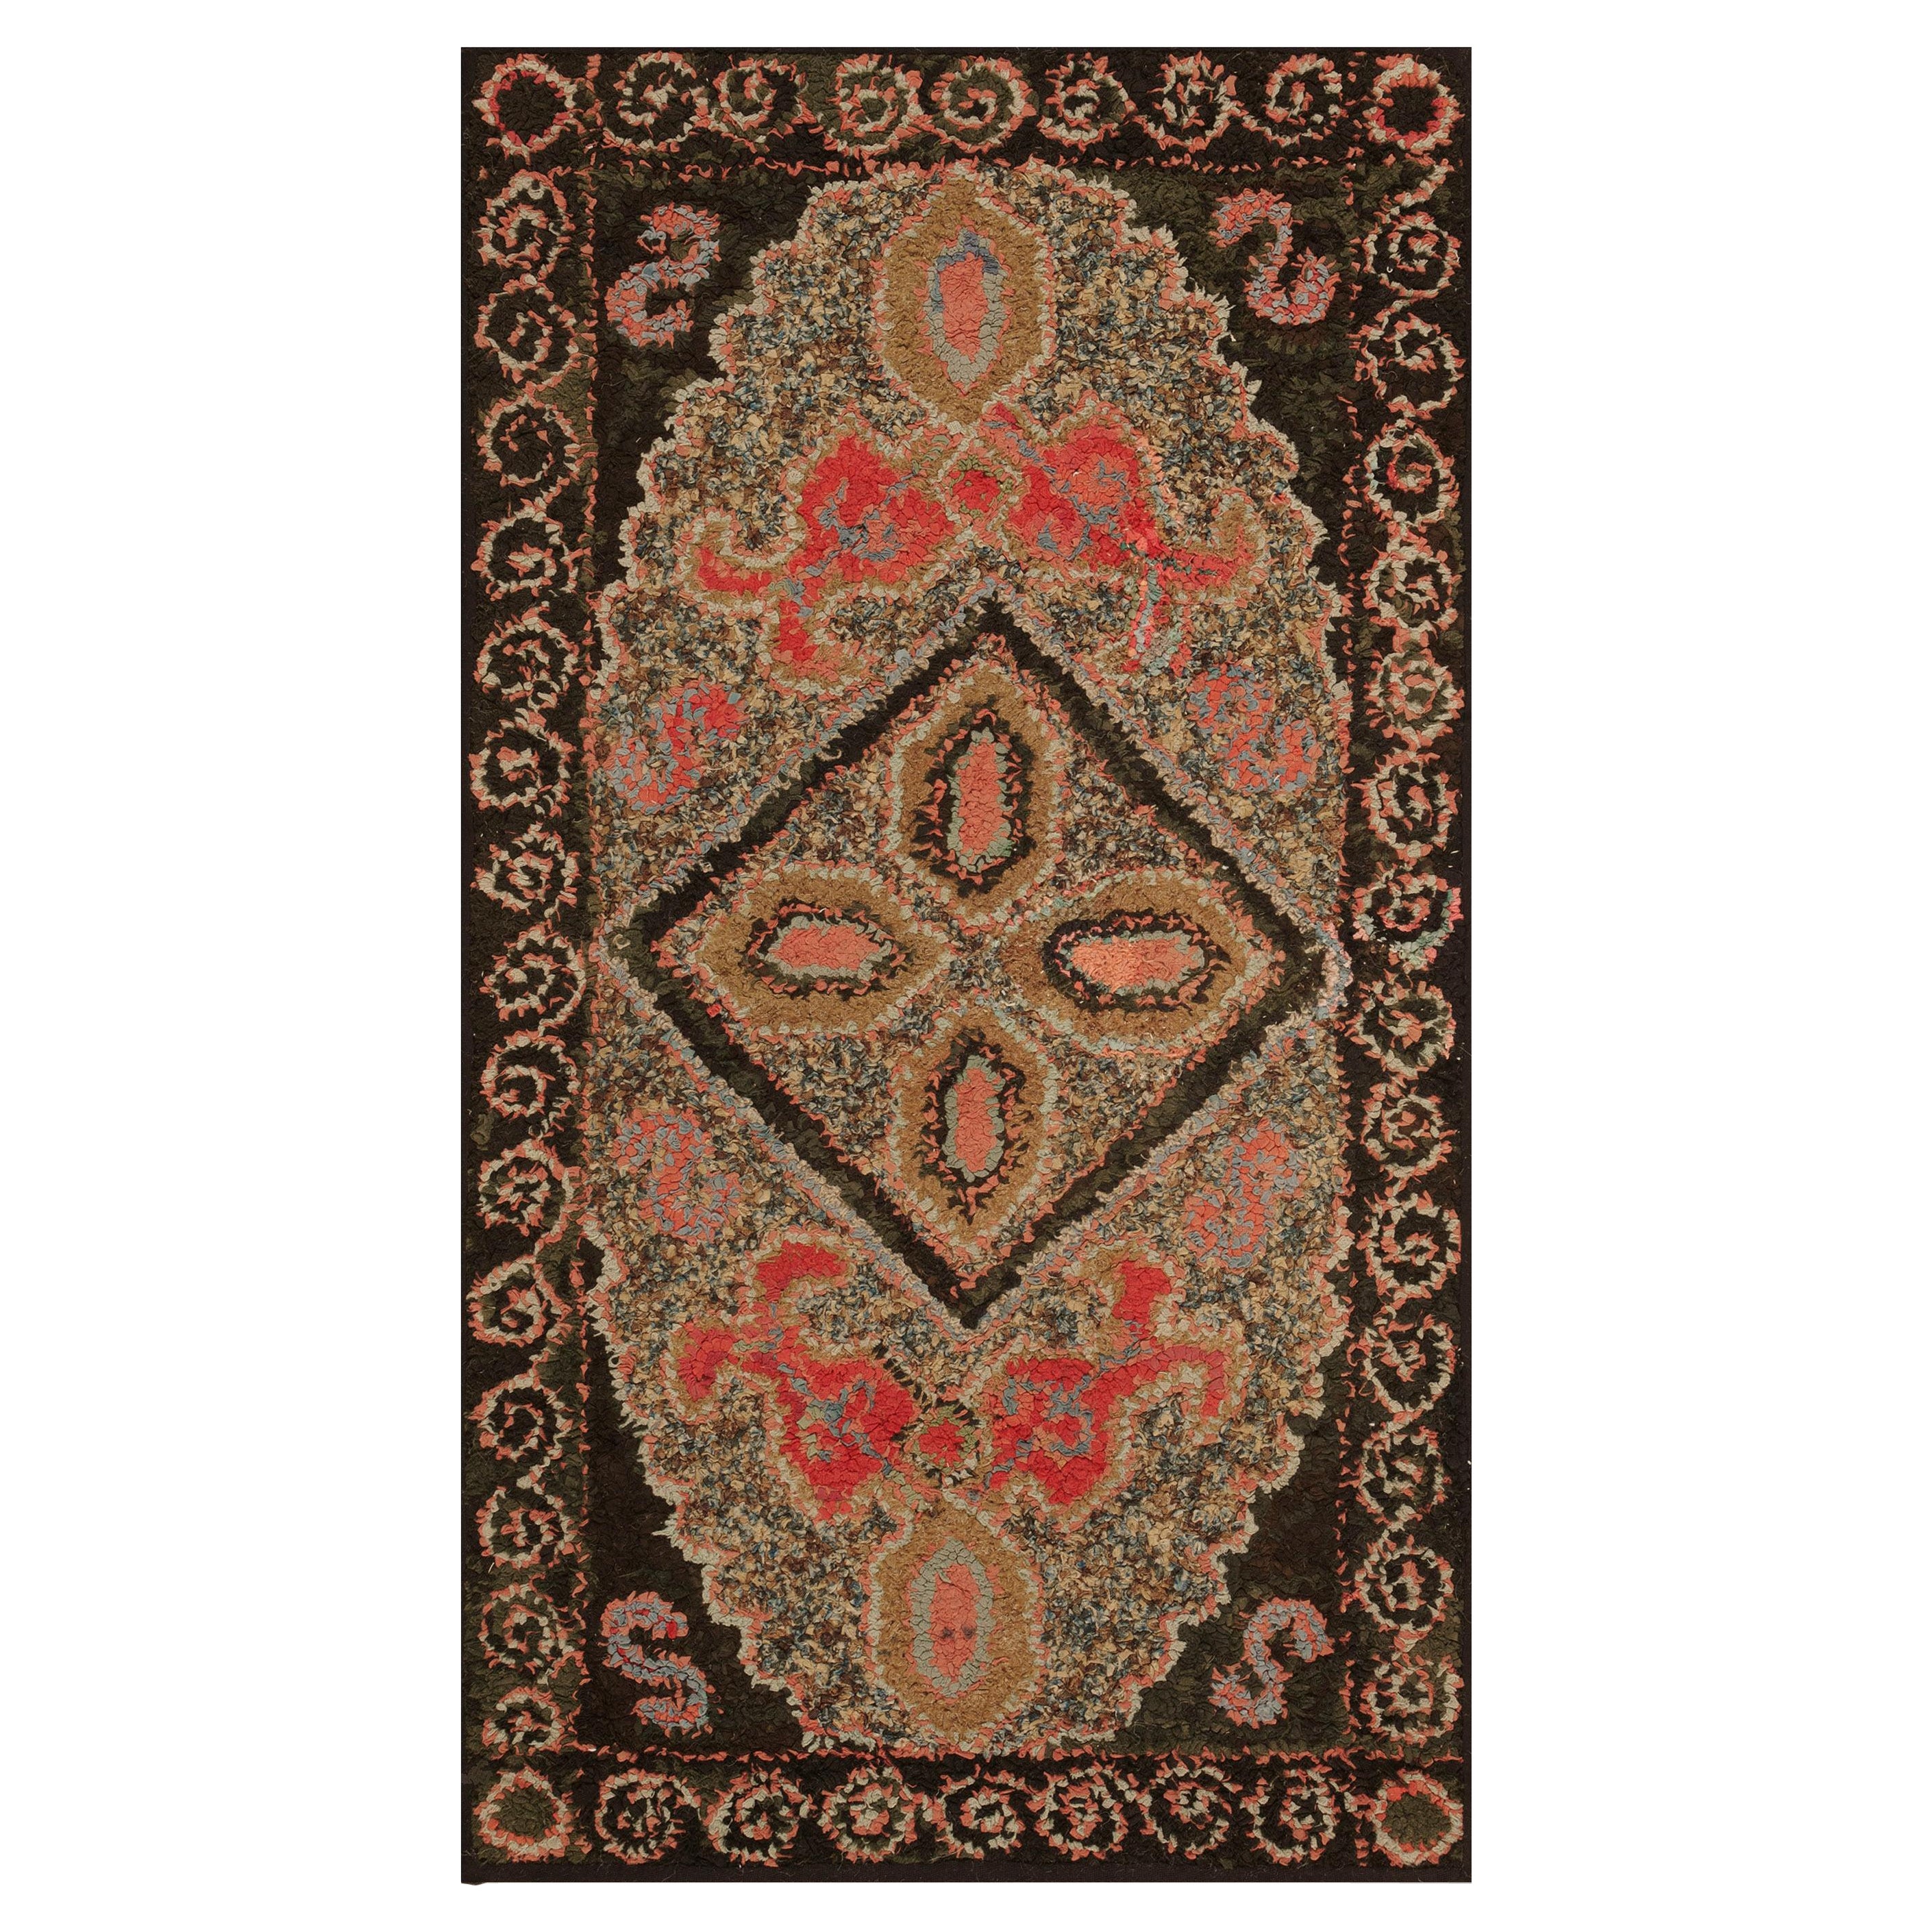 Early 20th Century American Hooked Rug ( 1' 10" x 3' 4" - 56 x 102 cm )